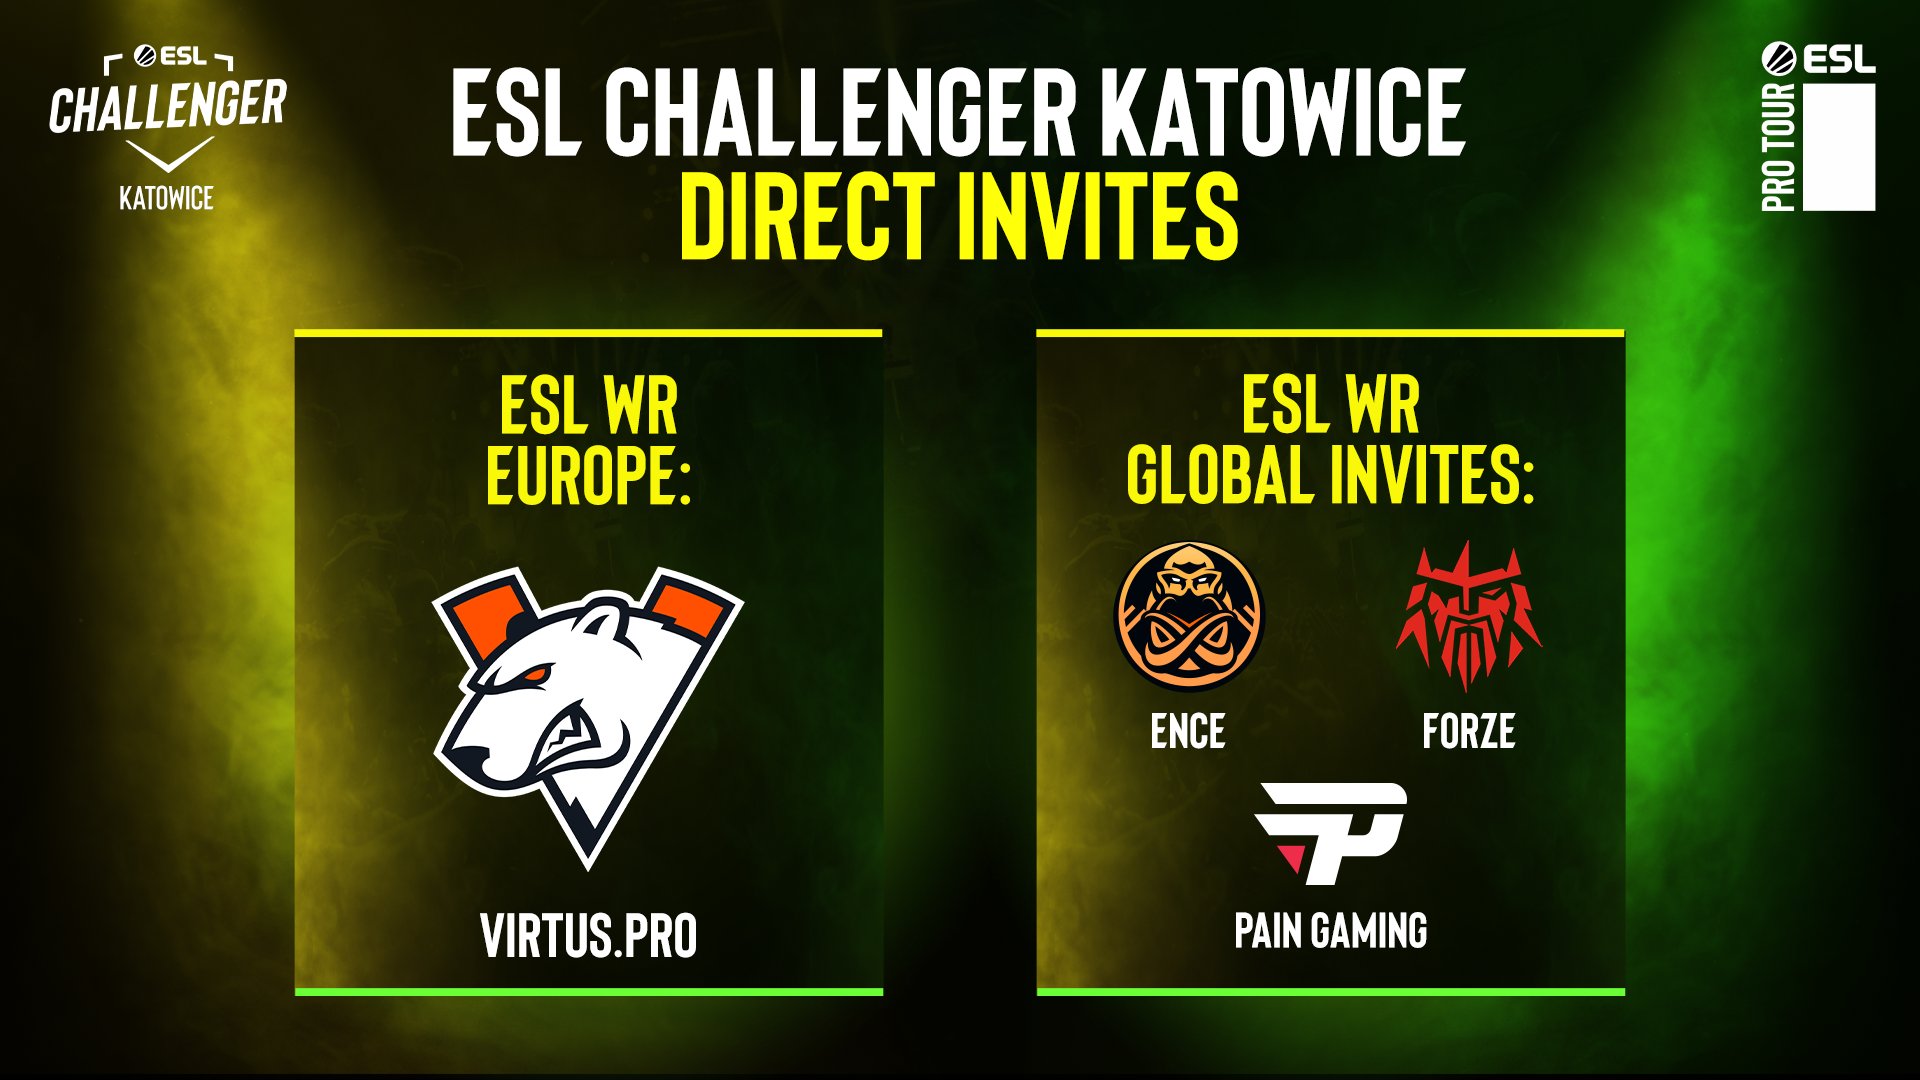 Four Teams Received Invitations to ESL Challenger Katowice